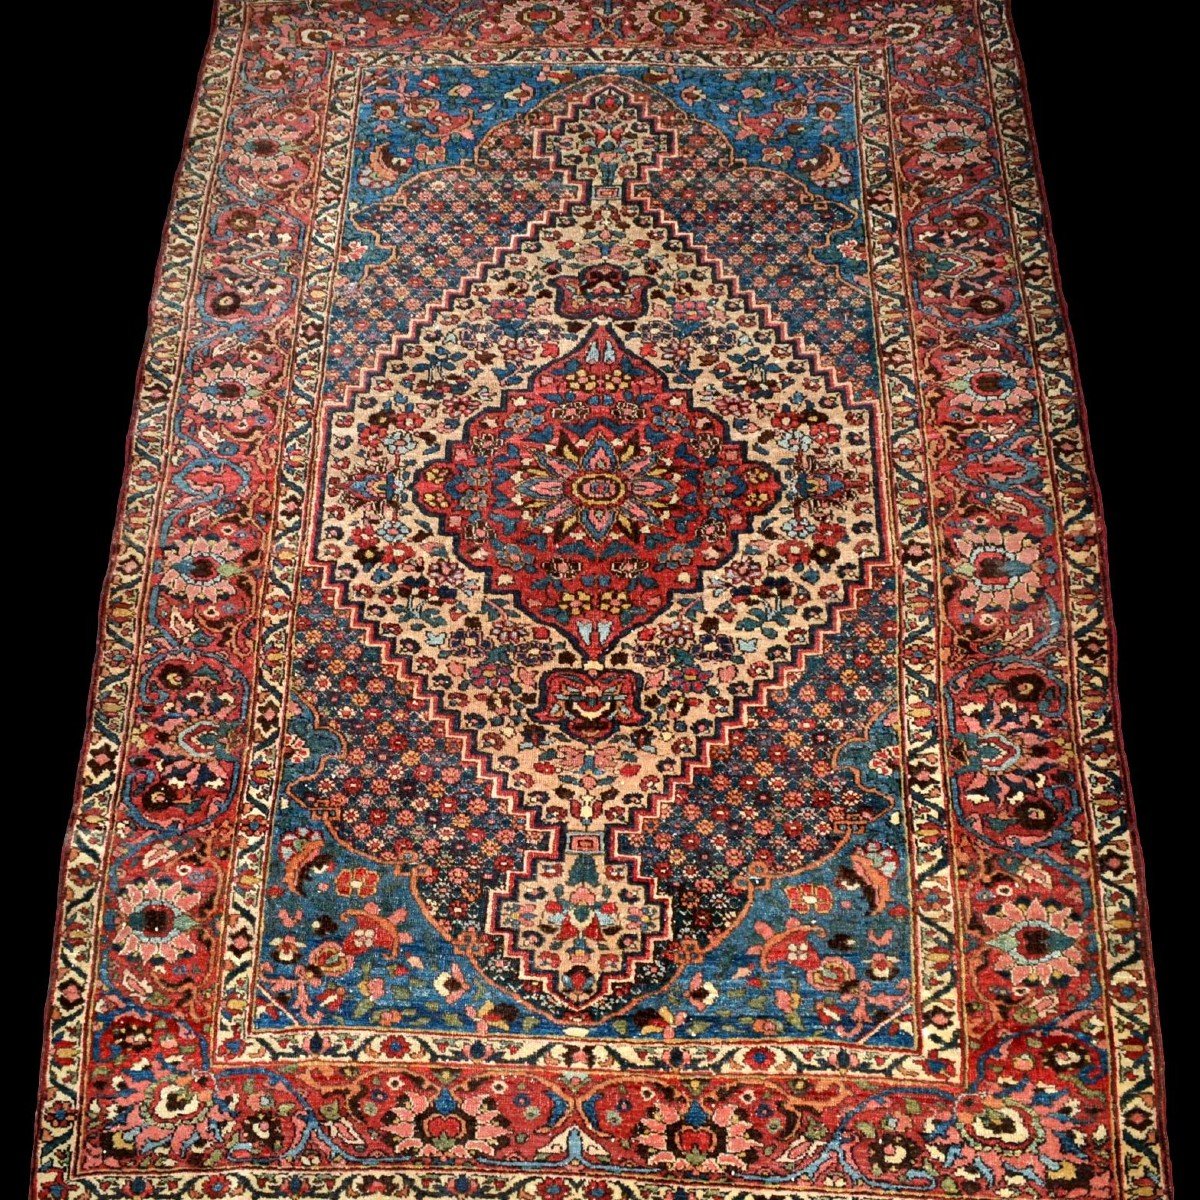 Old Bakhtiar Rug, 137 Cm X 203 Cm, Exceptional Design, Hand-knotted Wool, 19th Century Persia -photo-6